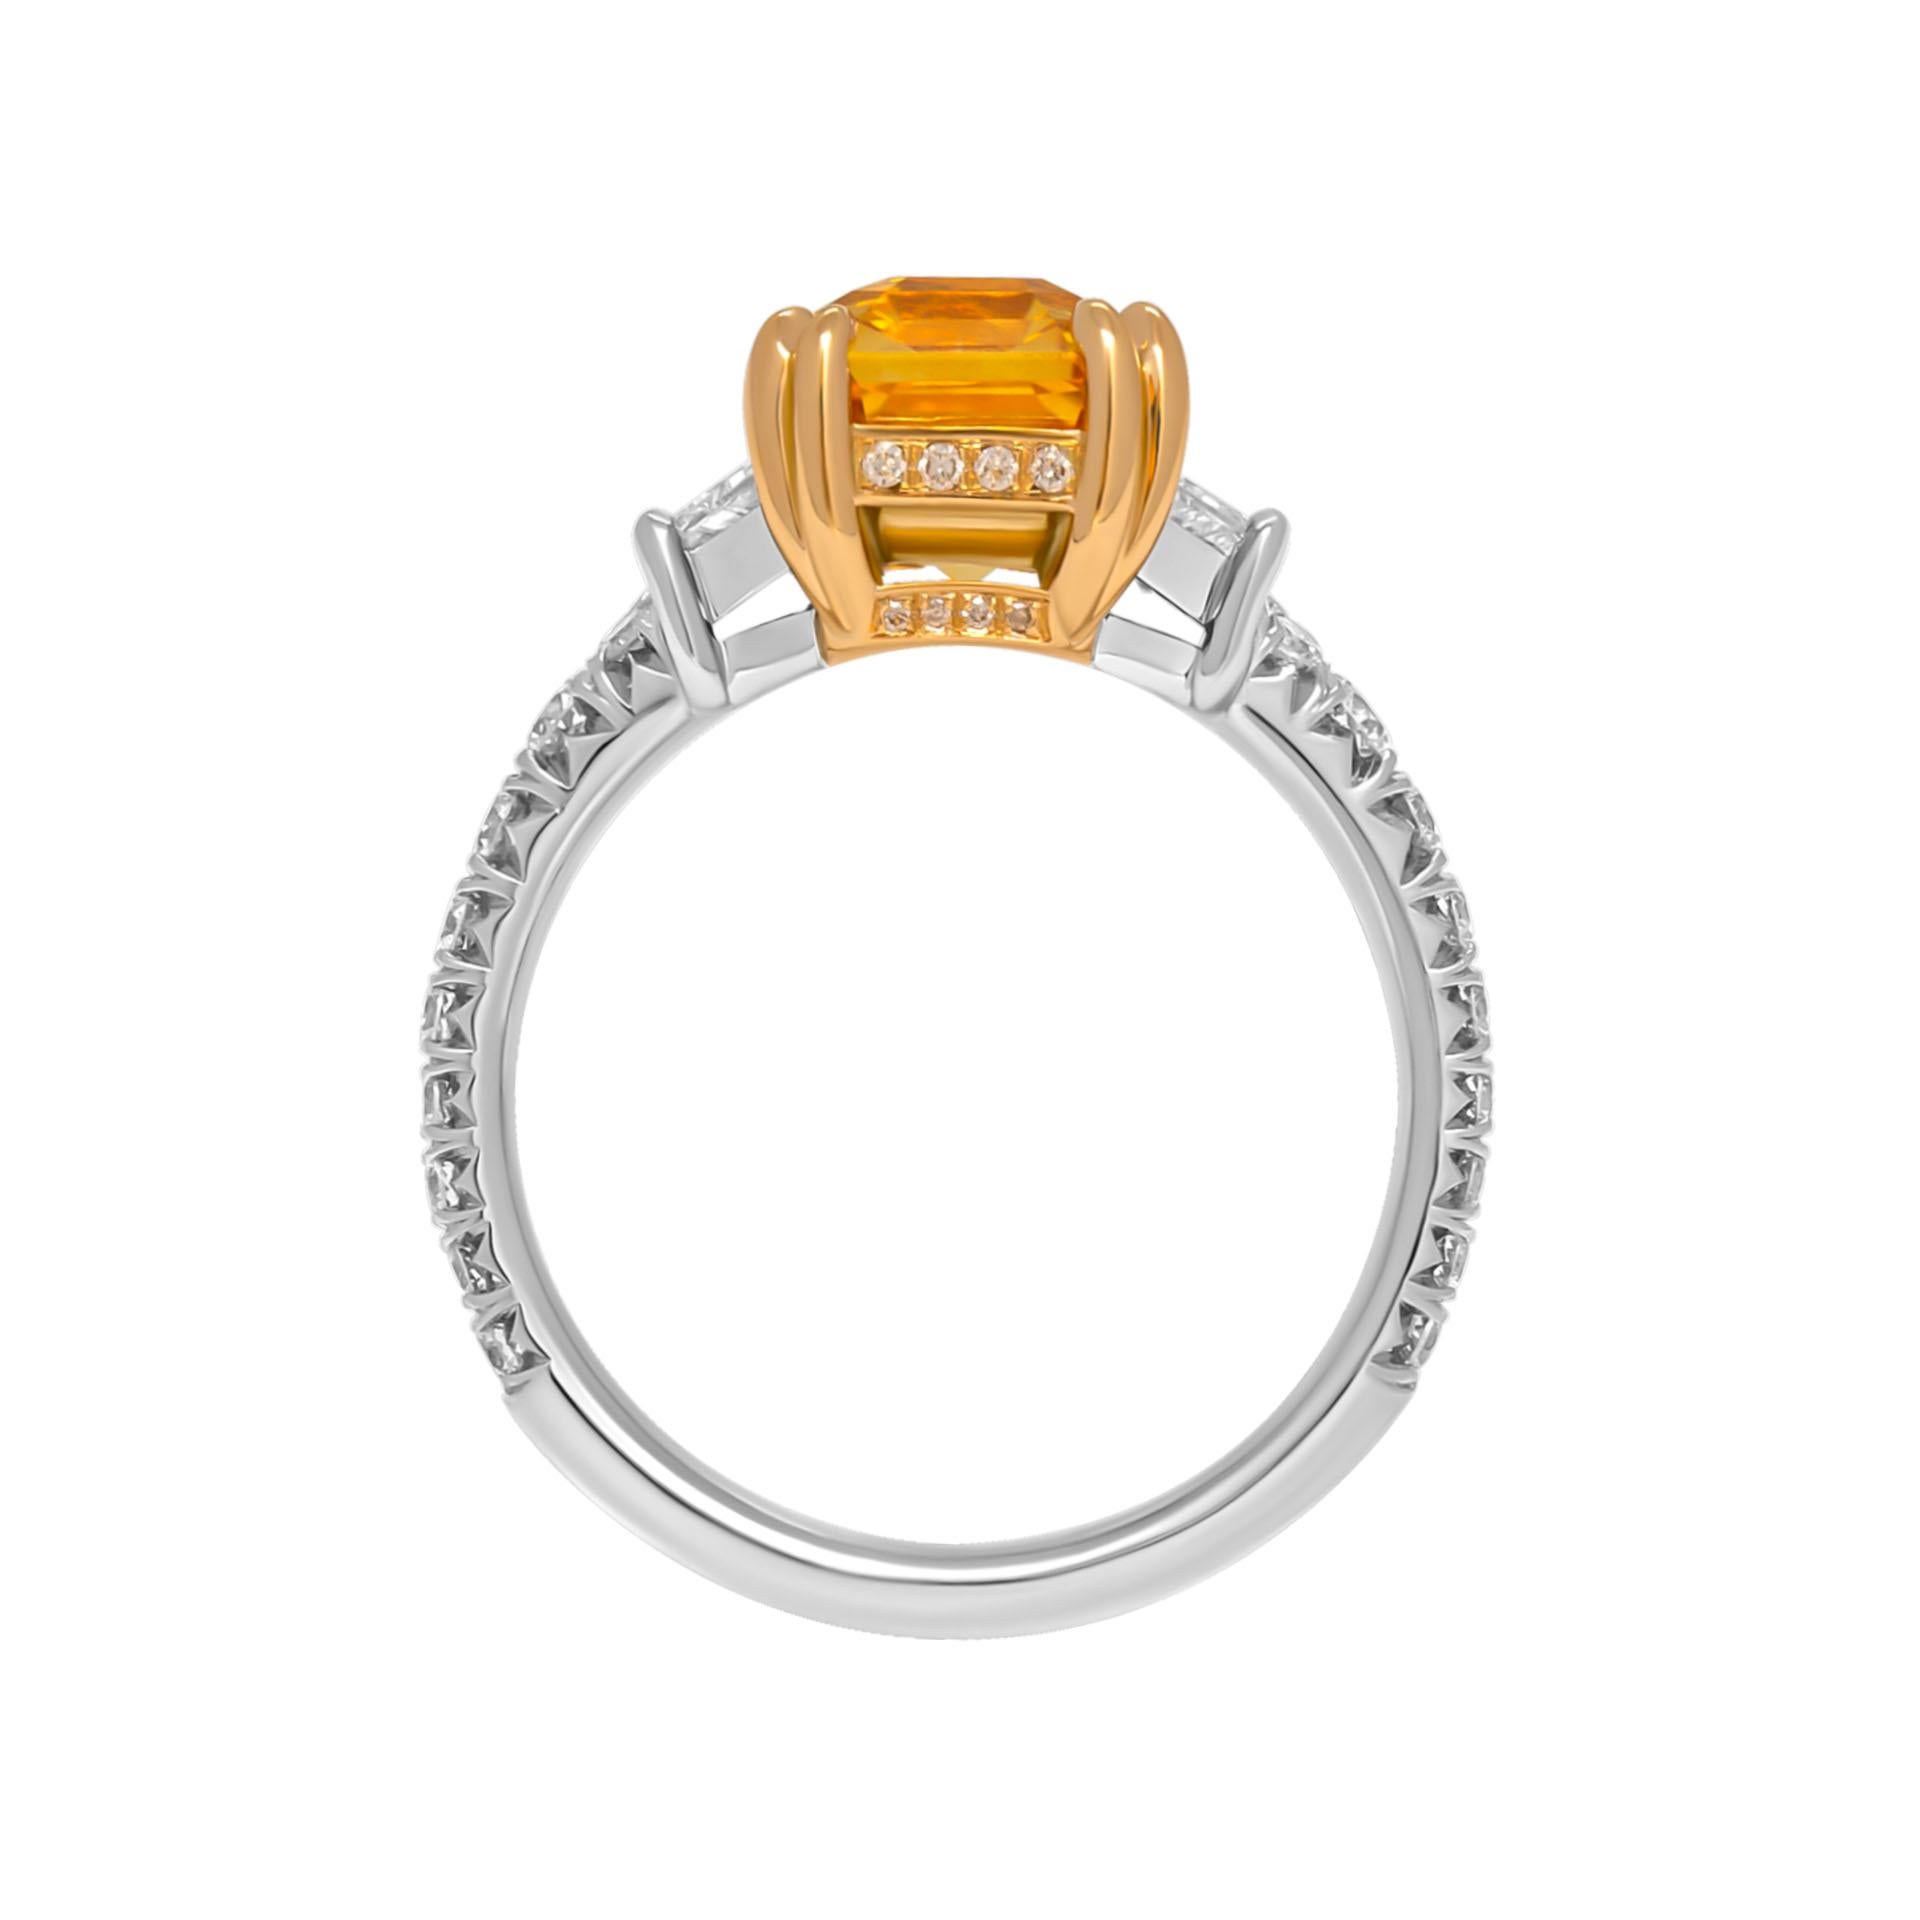 3 stone ring in PT950&18K Yellow Gold

Center: 5.02ct Yellow Sapphire Emerald Cut
Side stones: 0.76ct F/VS trapezoids

Diamond shank; diamond center wire
Total Carat Weight: 0.45ct
Size:6.5
